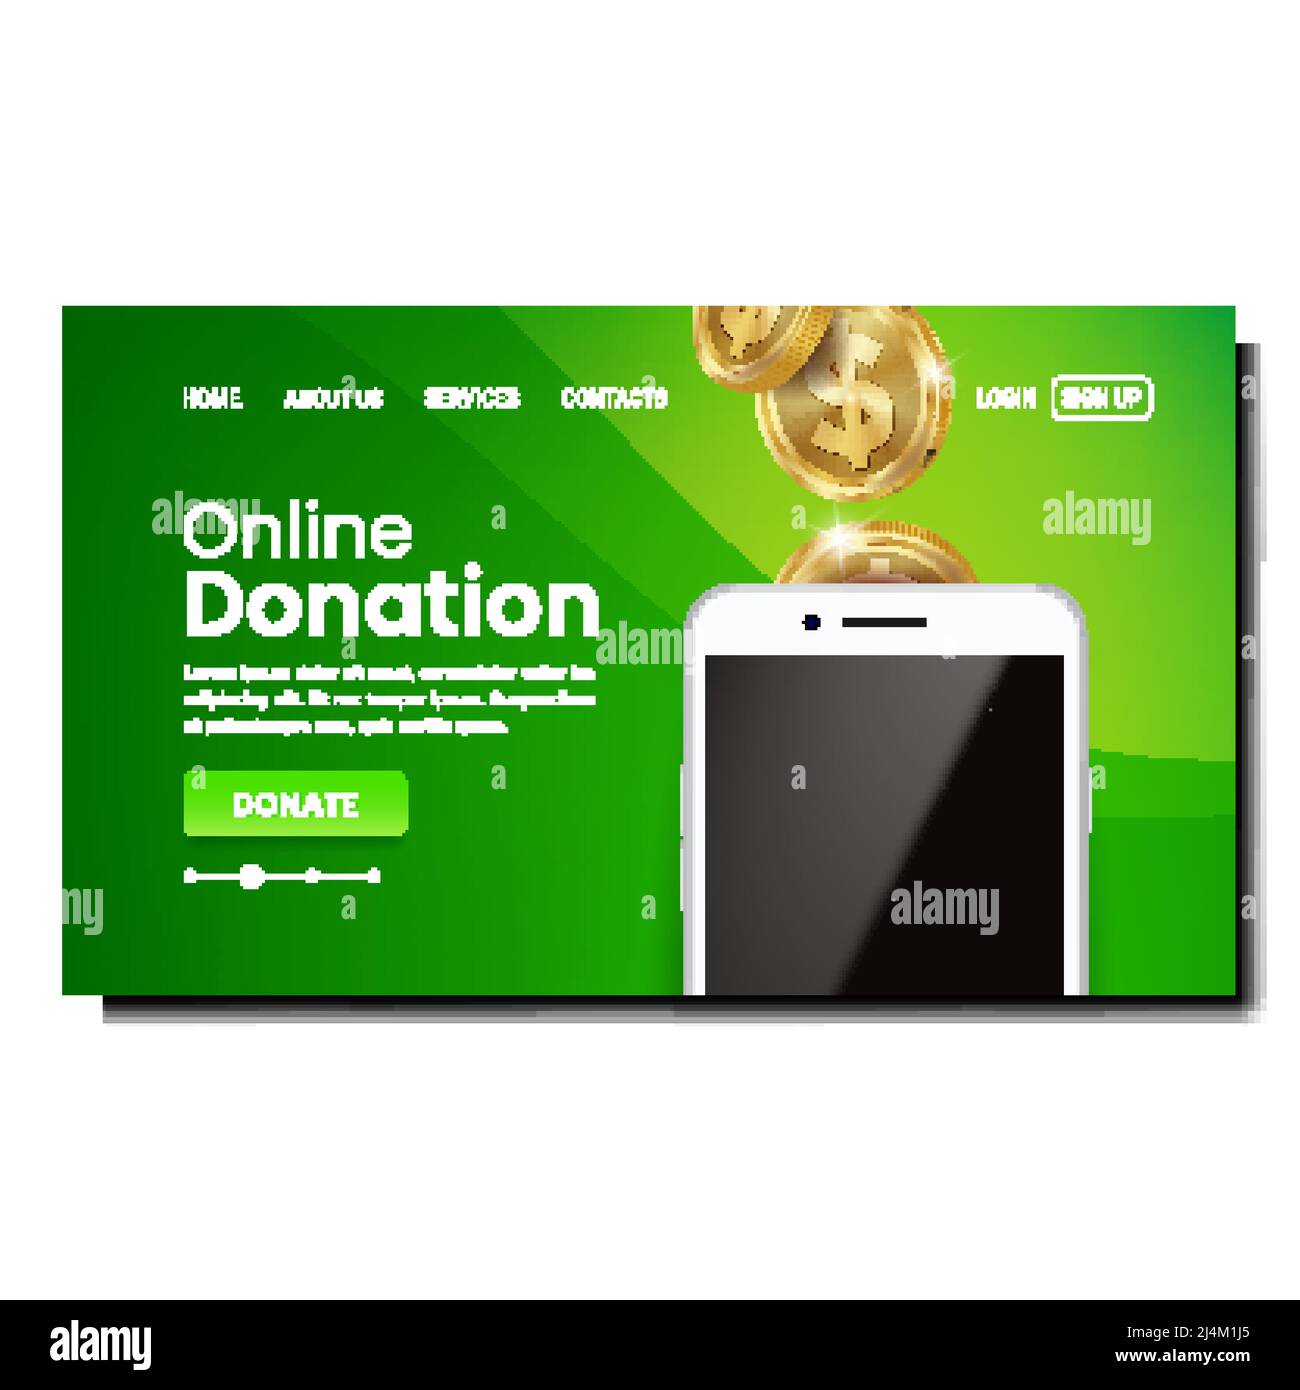 Online Donation Mobile Phone Application Vector Stock Vector